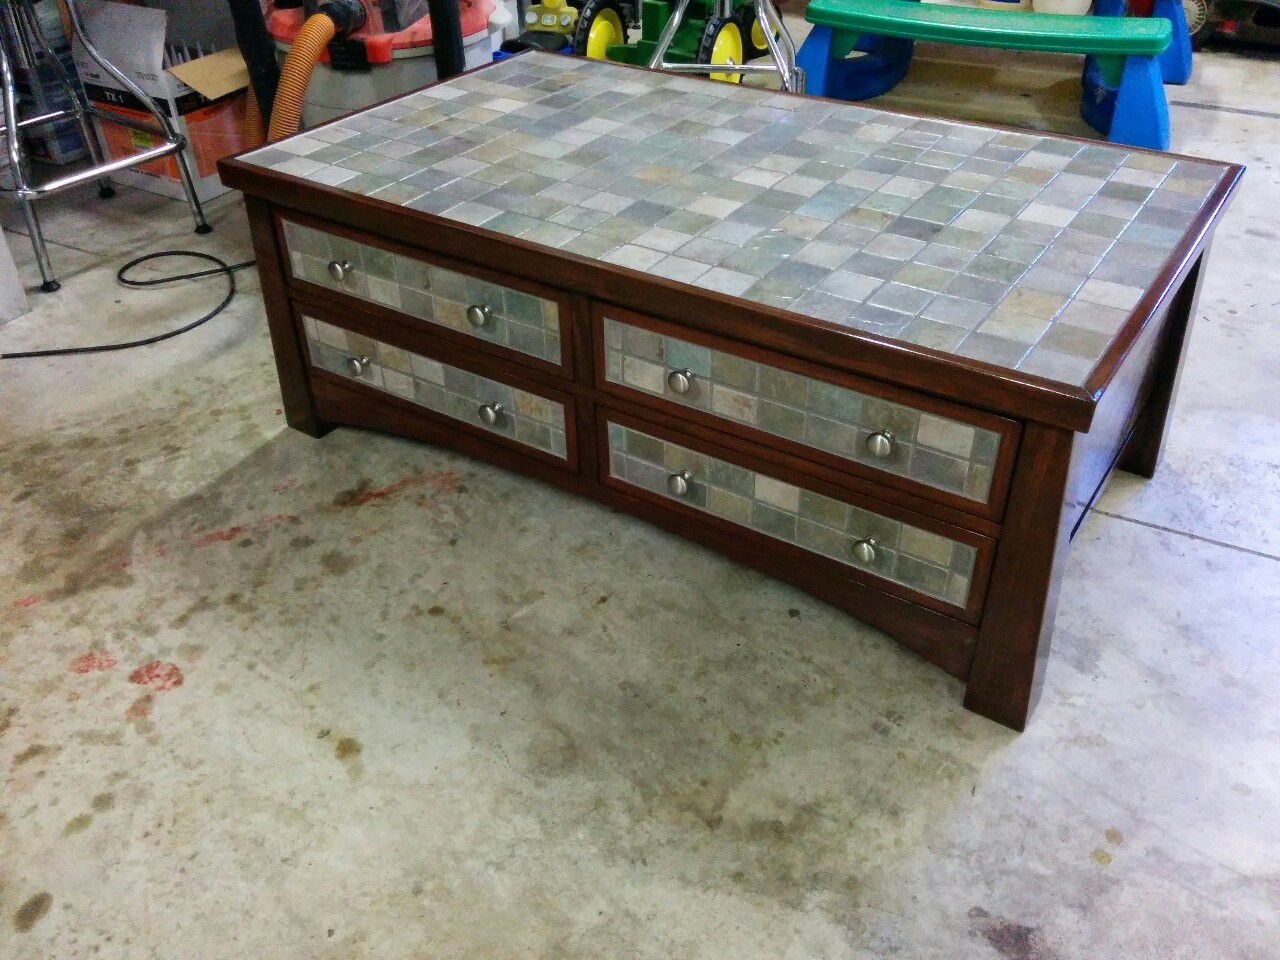 The MOchinist - Craigslist coffee table part 7: Finishing ...